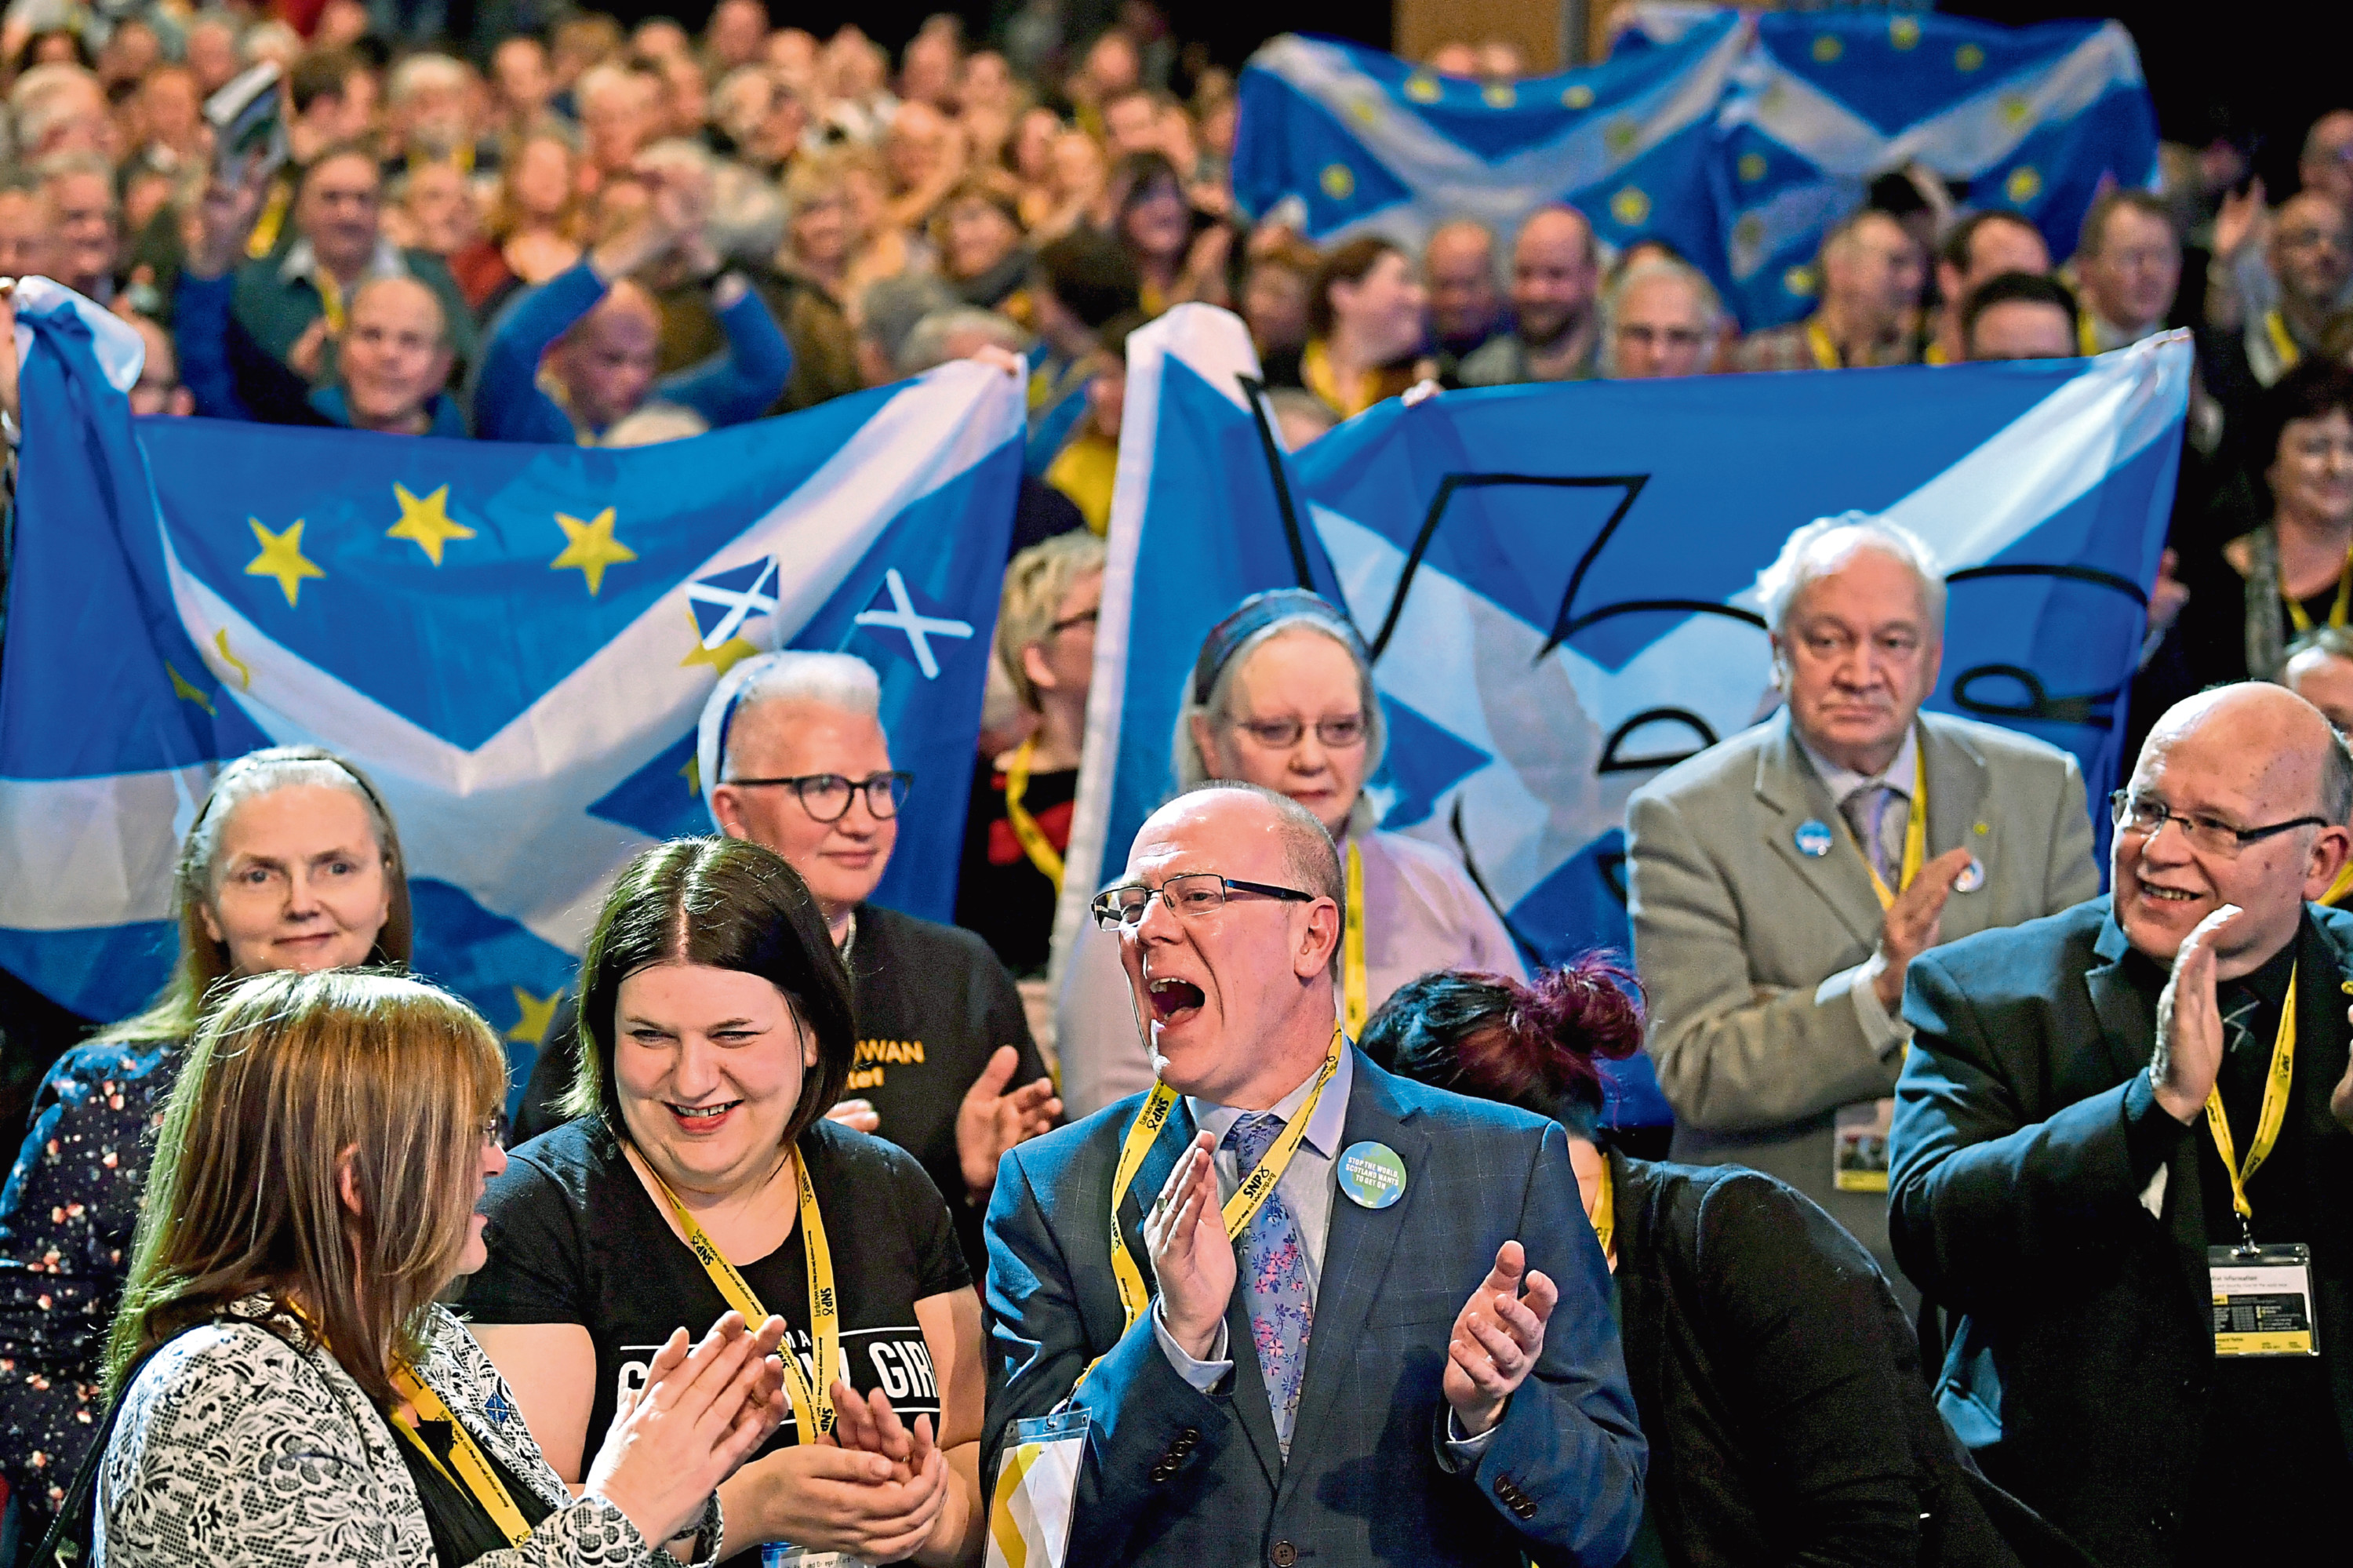 ABERDEEN, SCOTLAND - MARCH 18:  Delegates react after Scottish First Minister Nicola Sturgeon gave  her keynote speech at the SNP spring conference on March 18, 2017 in Aberdeeen, Scotland. Party members and delegates are focusing on a second Scottish independence referendum as the party meets for its spring conference in Aberdeen.
  (Photo by Jeff J Mitchell/Getty Images)